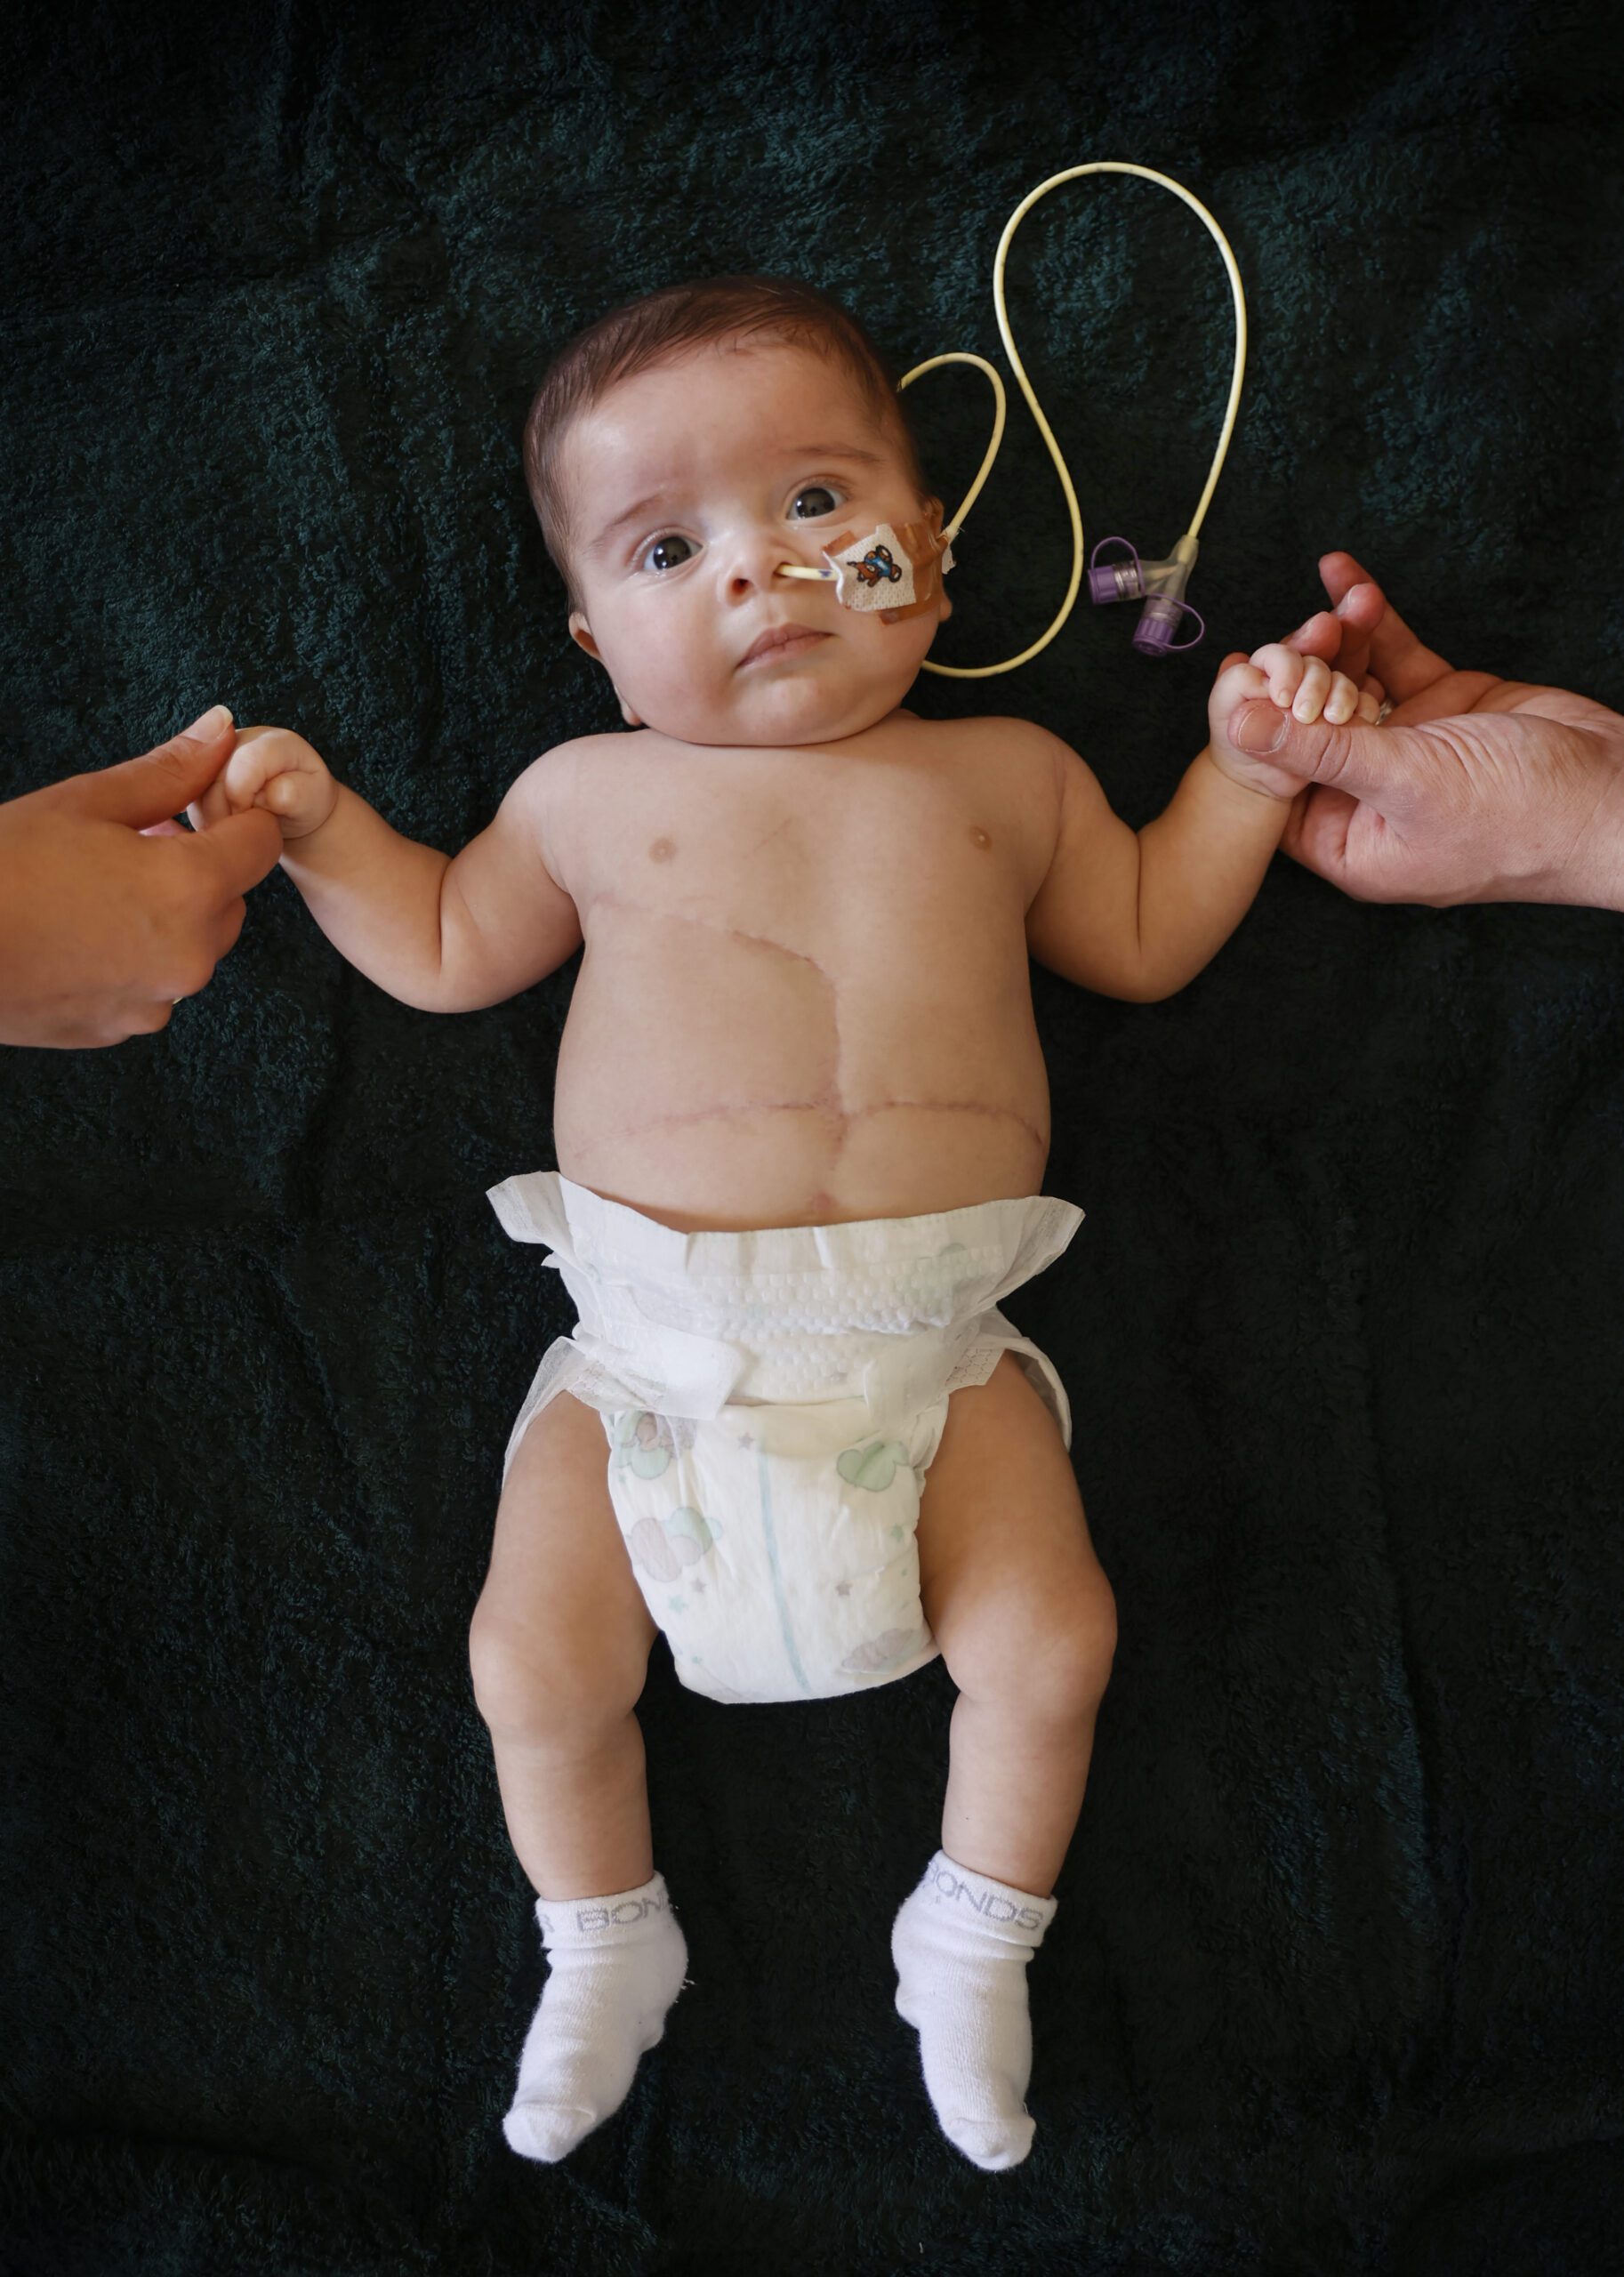 Baby tumour patient with hands held